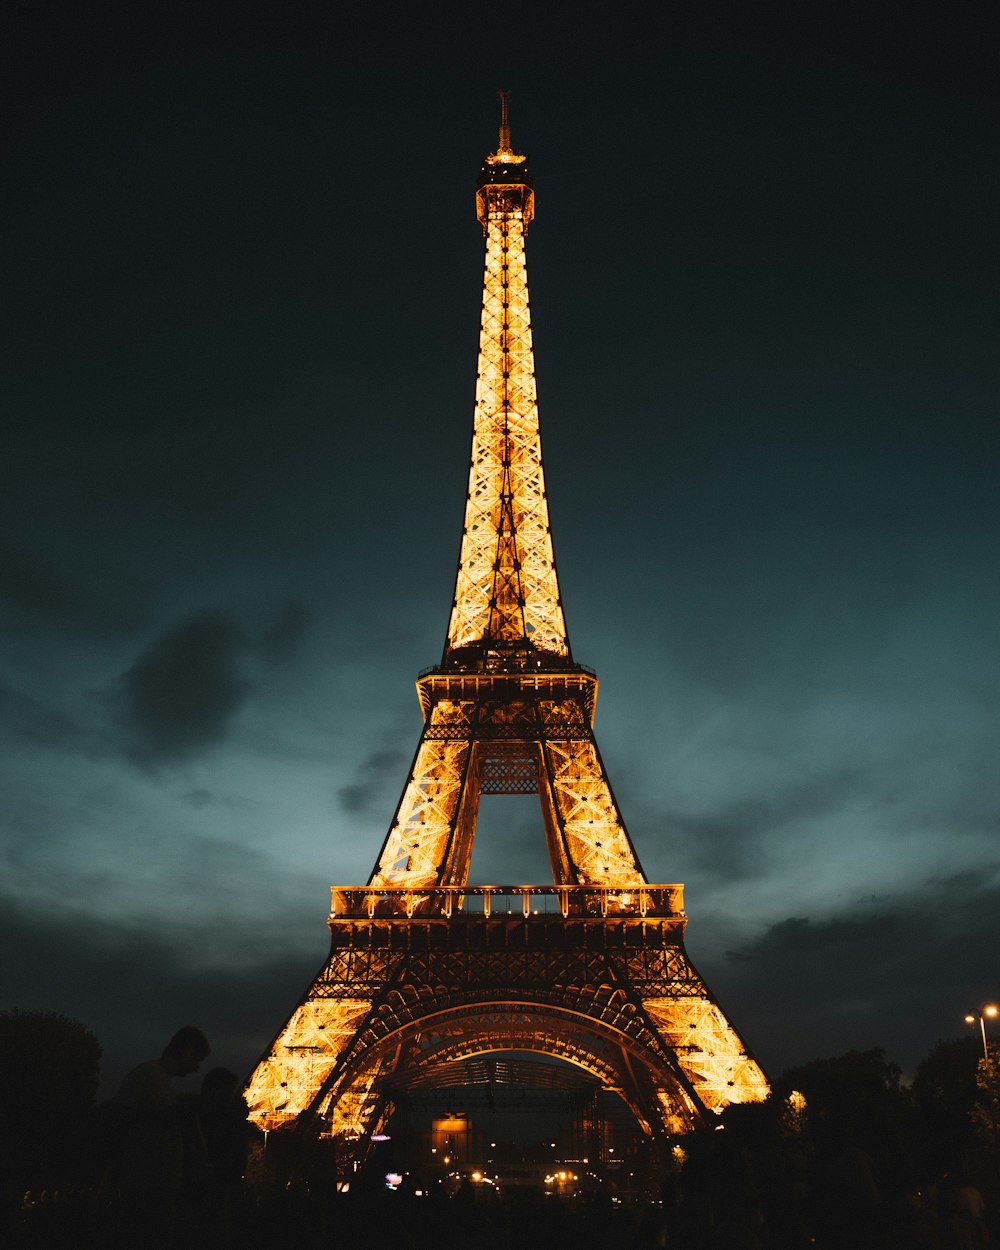 1000+ Eiffel Tower At Night Pictures | Download Free Images on Unsplash